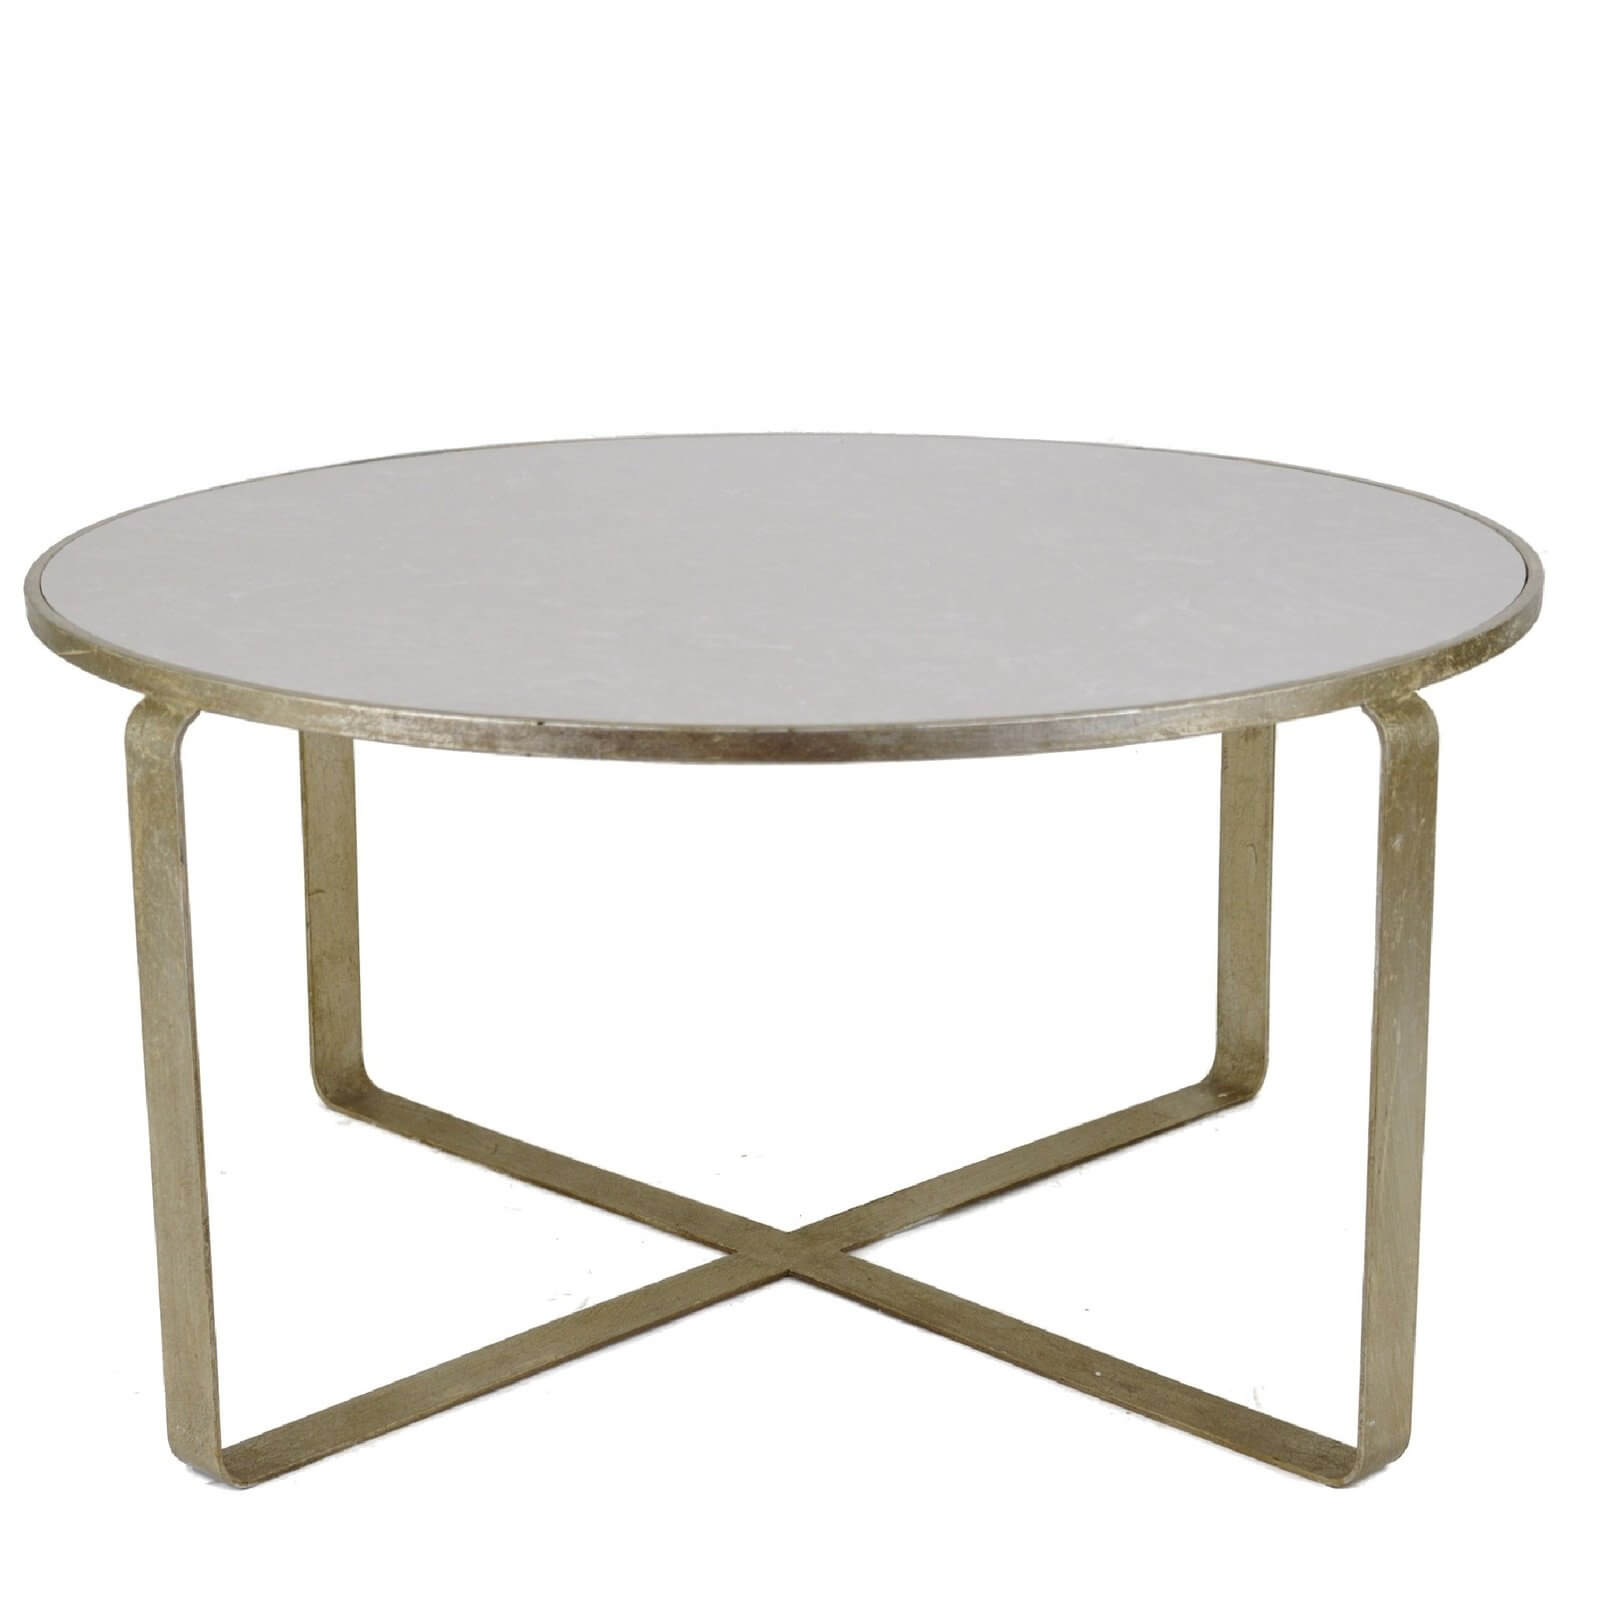 Donnas Silver Leaf Stone Top Coffee Table - Lillian Home 